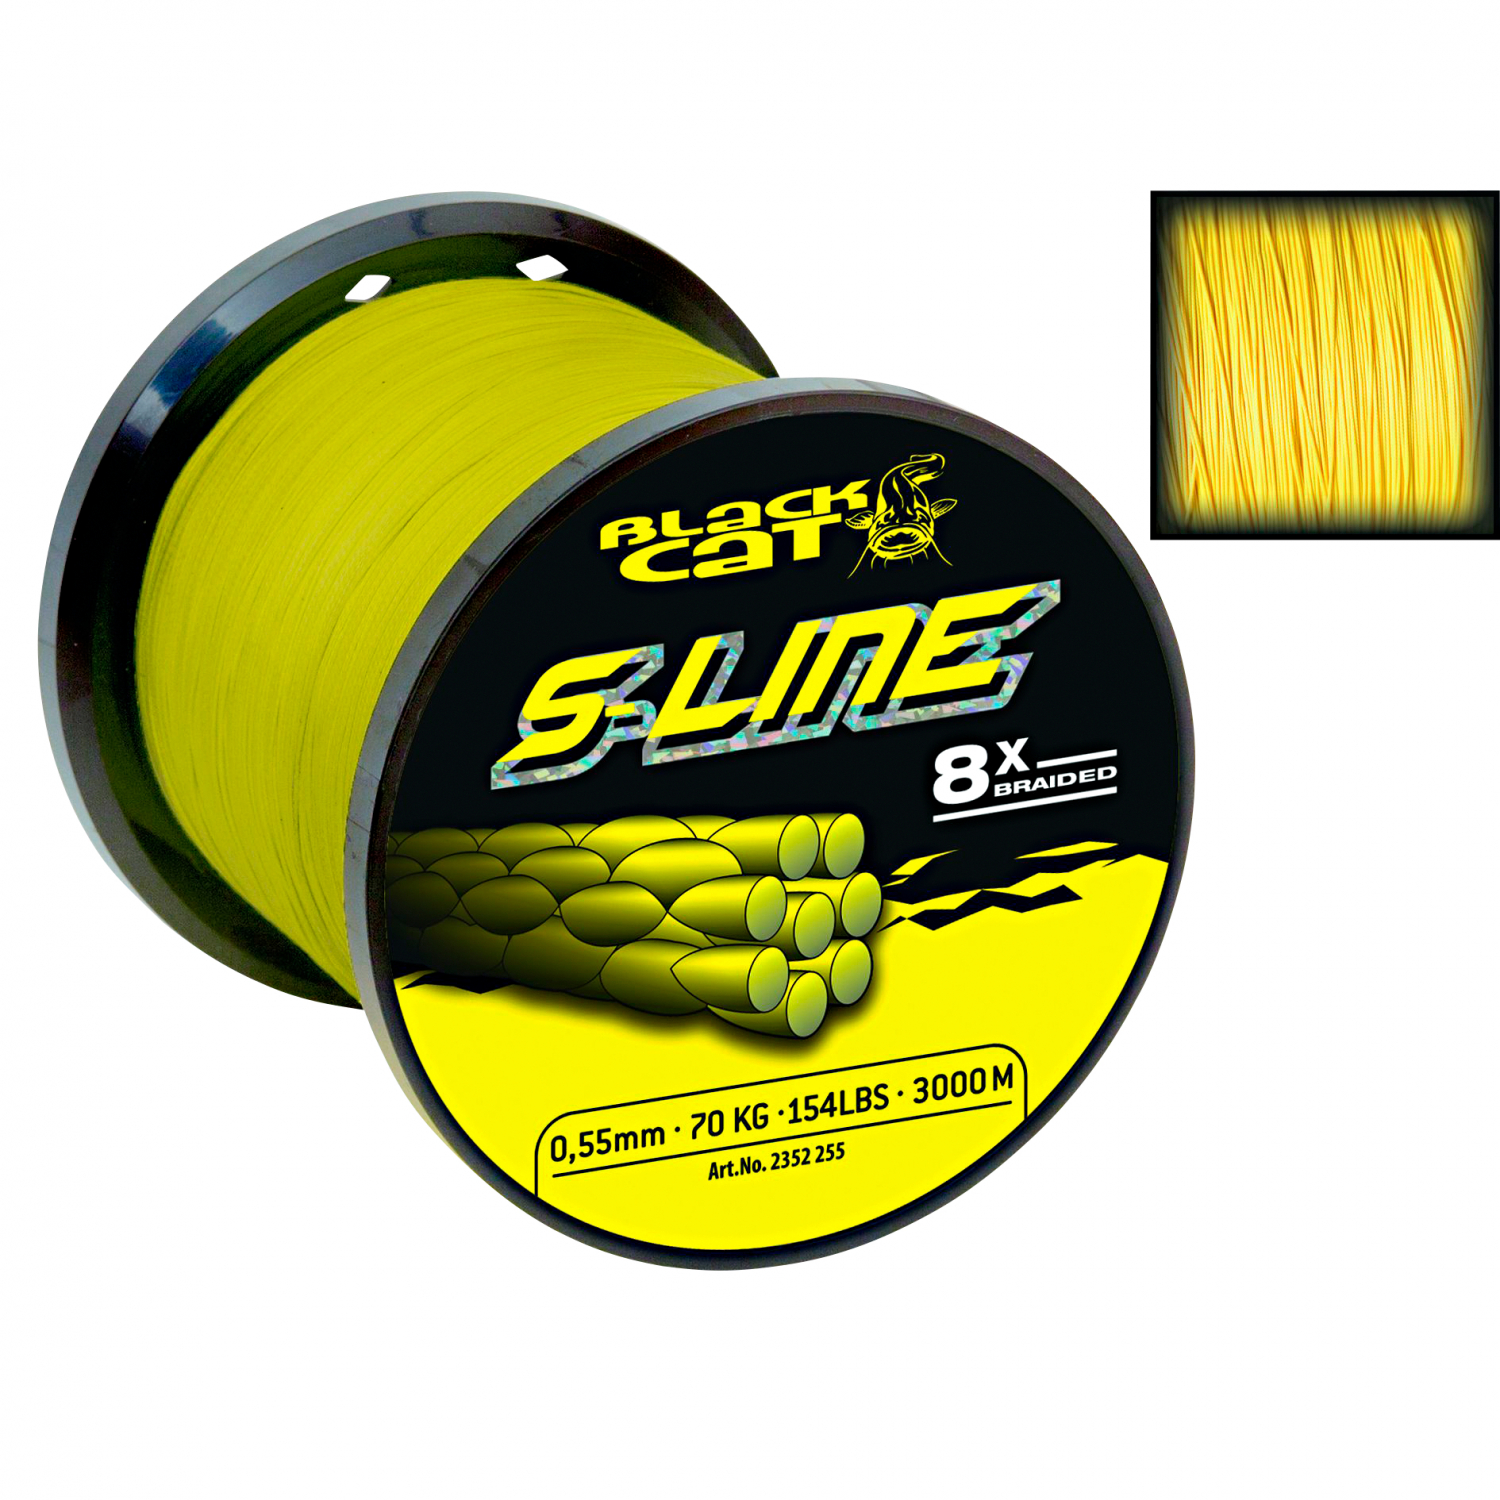 Black Cat Fishing line Cat S-Line yellow (3000 m) at low prices